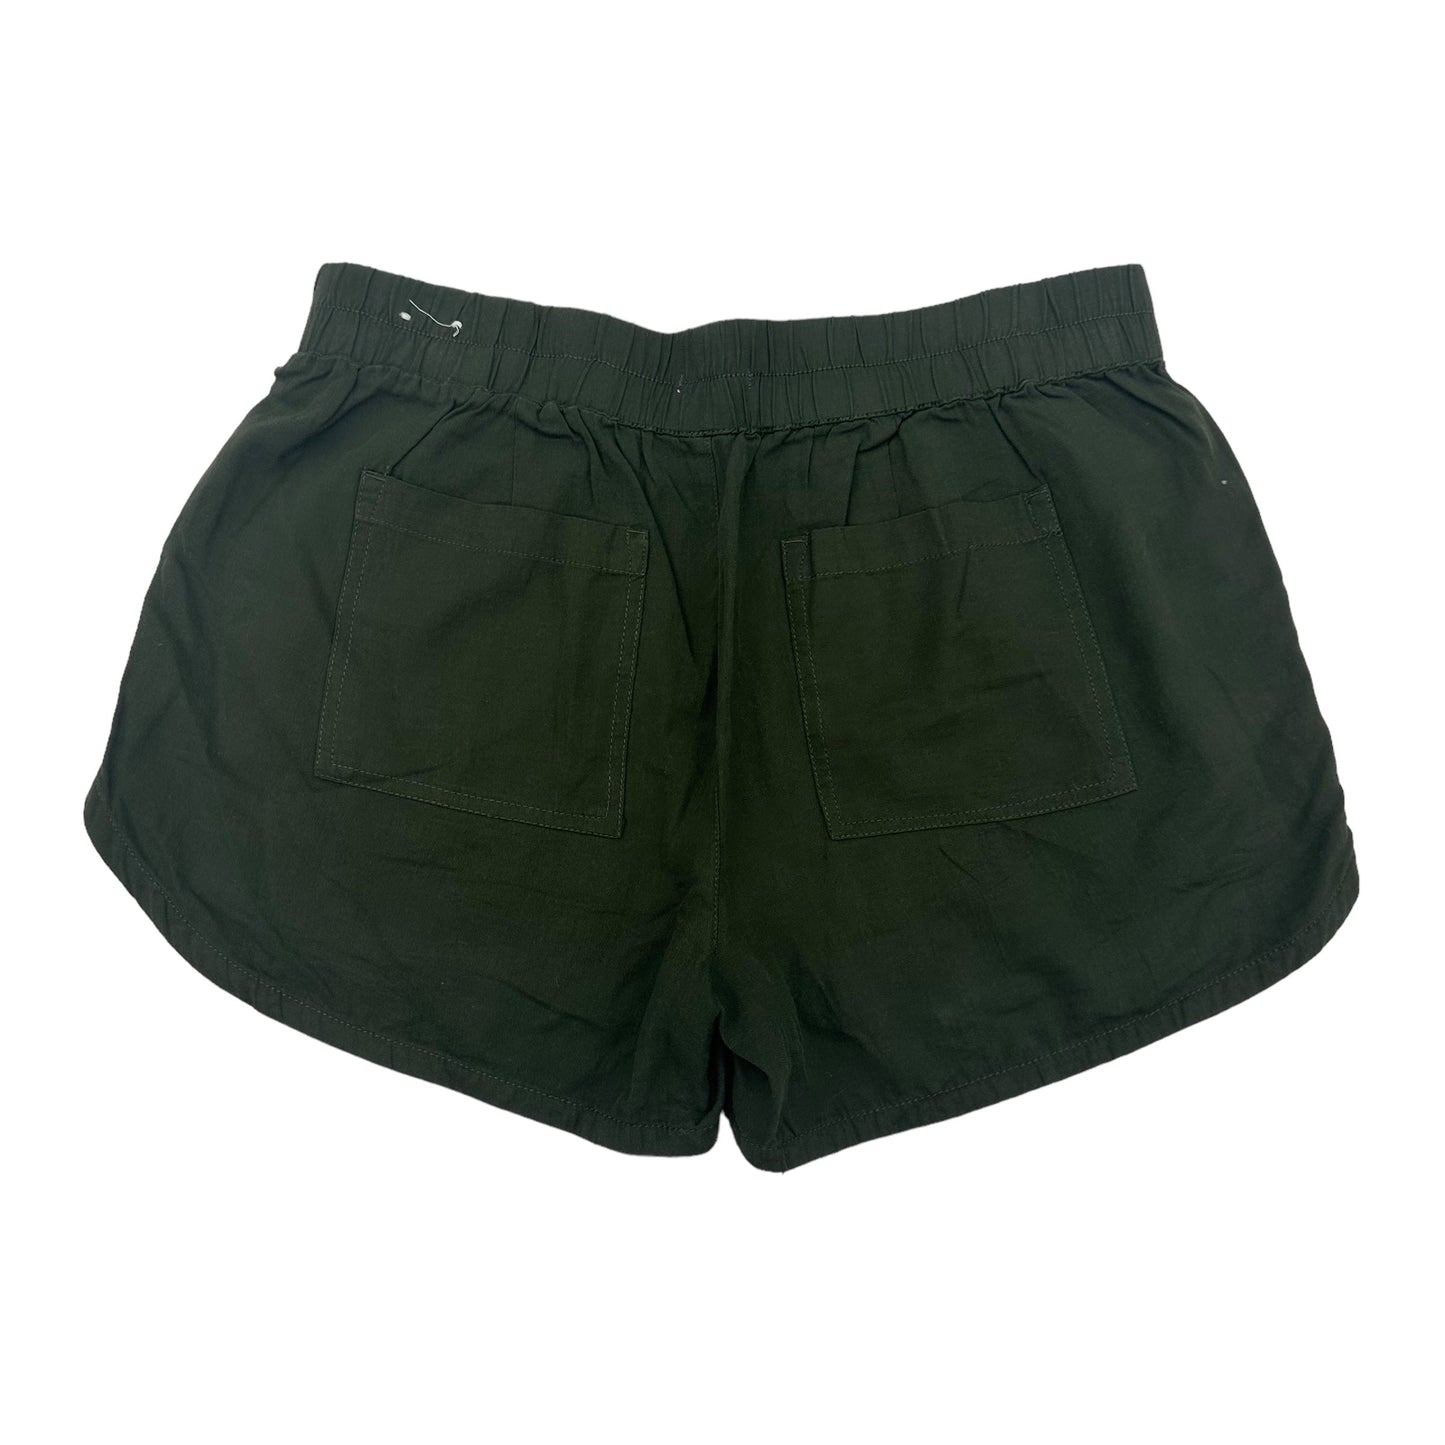 GREEN MAURICES SHORTS, Size L